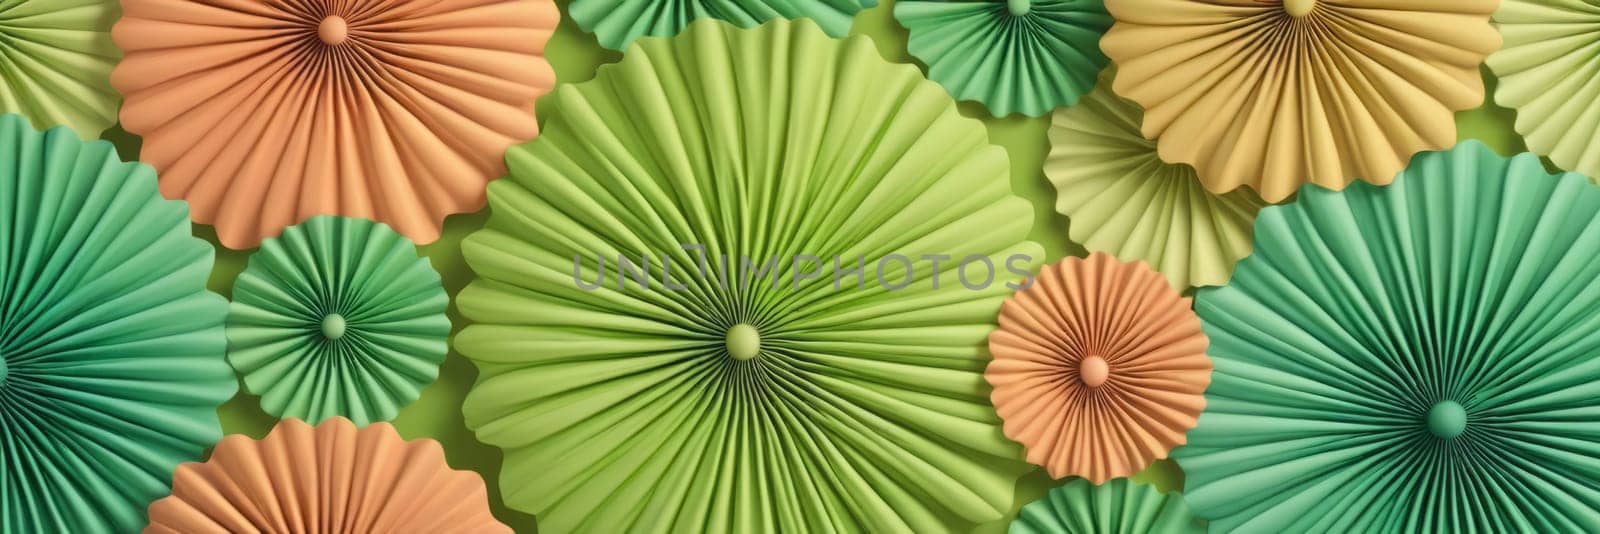 Rosette Shapes in Green and Bisque by nkotlyar